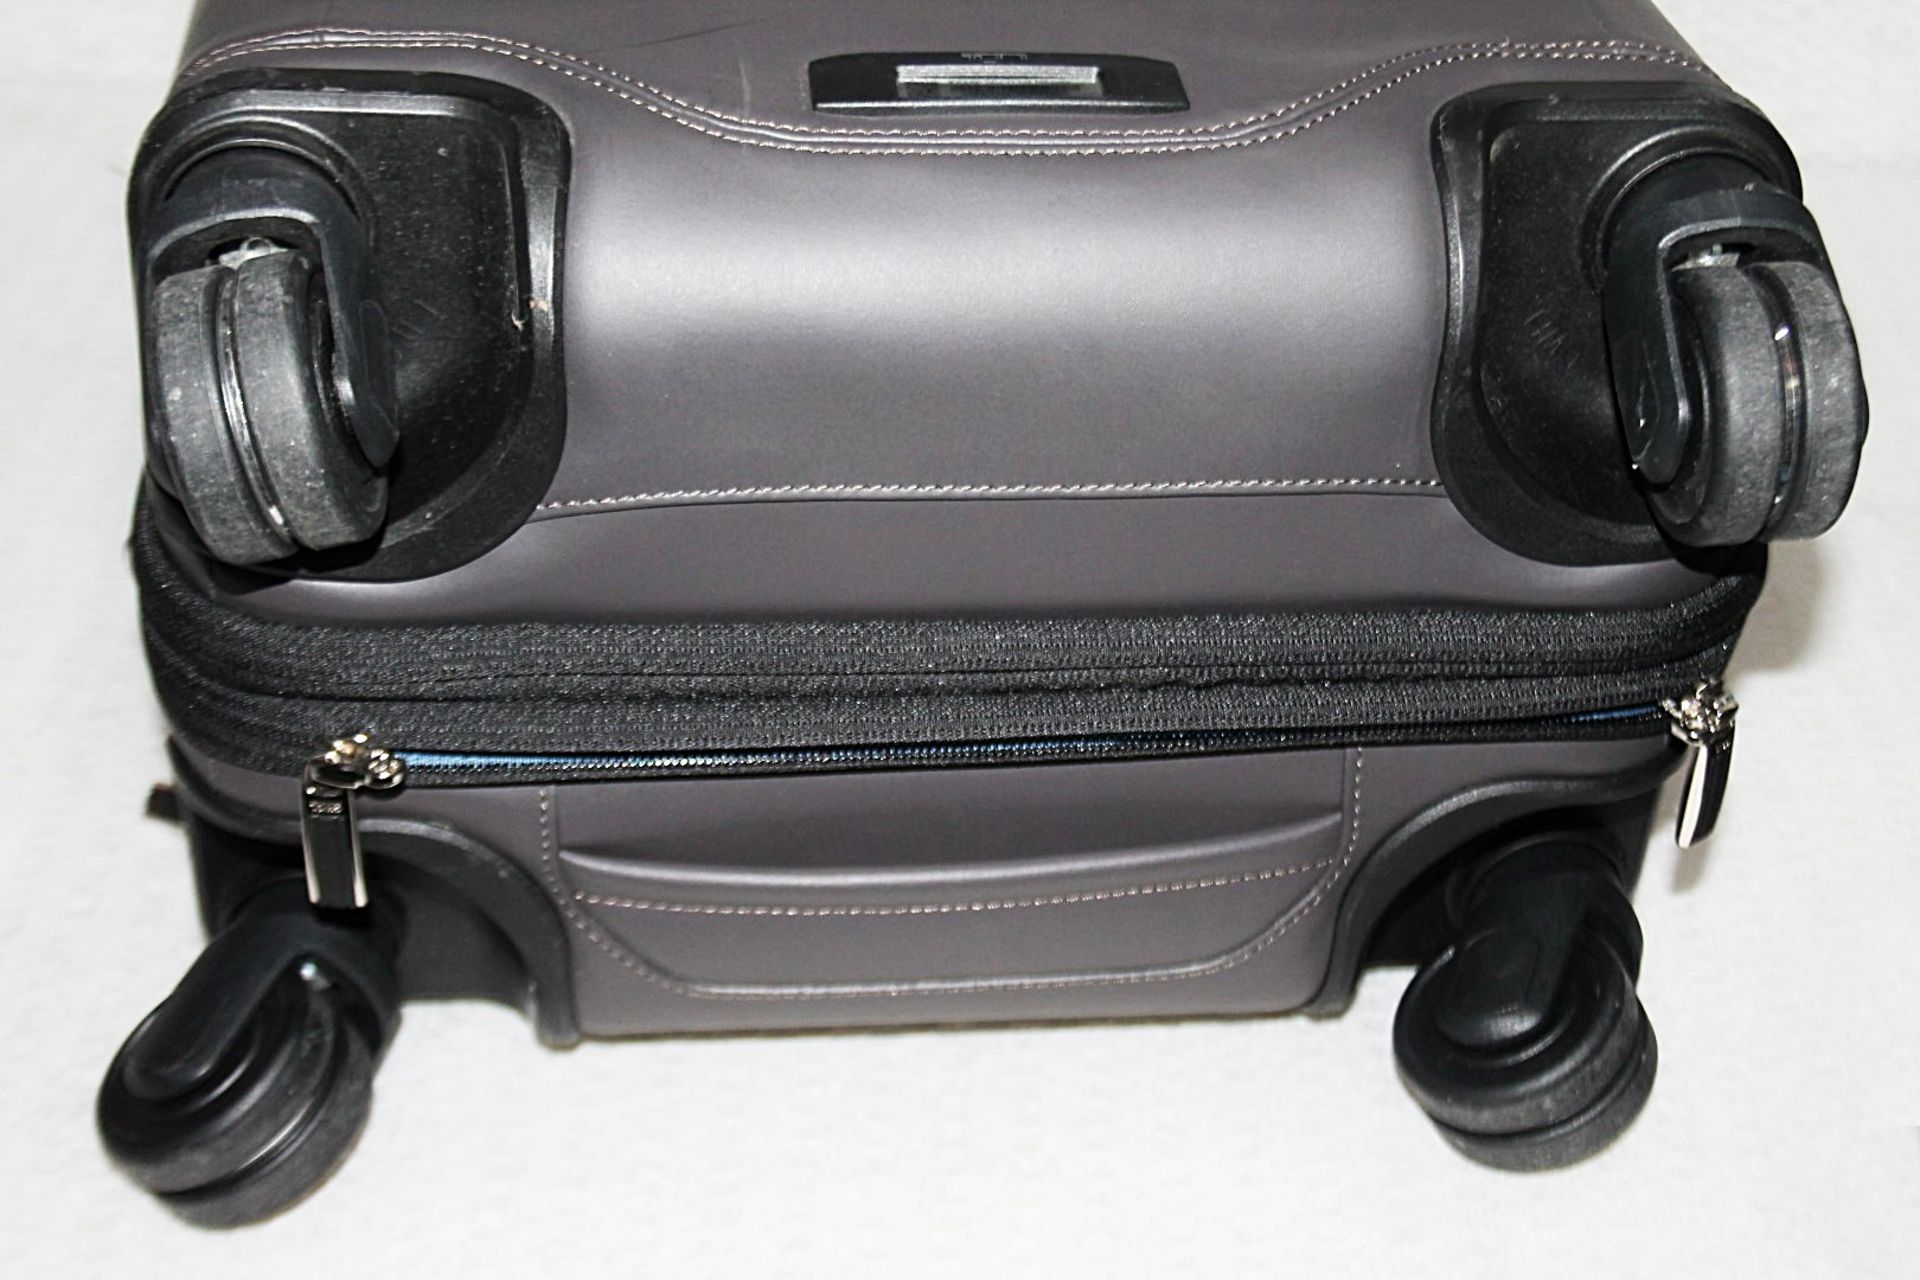 1 x TUMI Luxury Leather Travel Carry-On Case With Telescoping Handle In A Taupe / Gunmetal Grey - Image 11 of 24